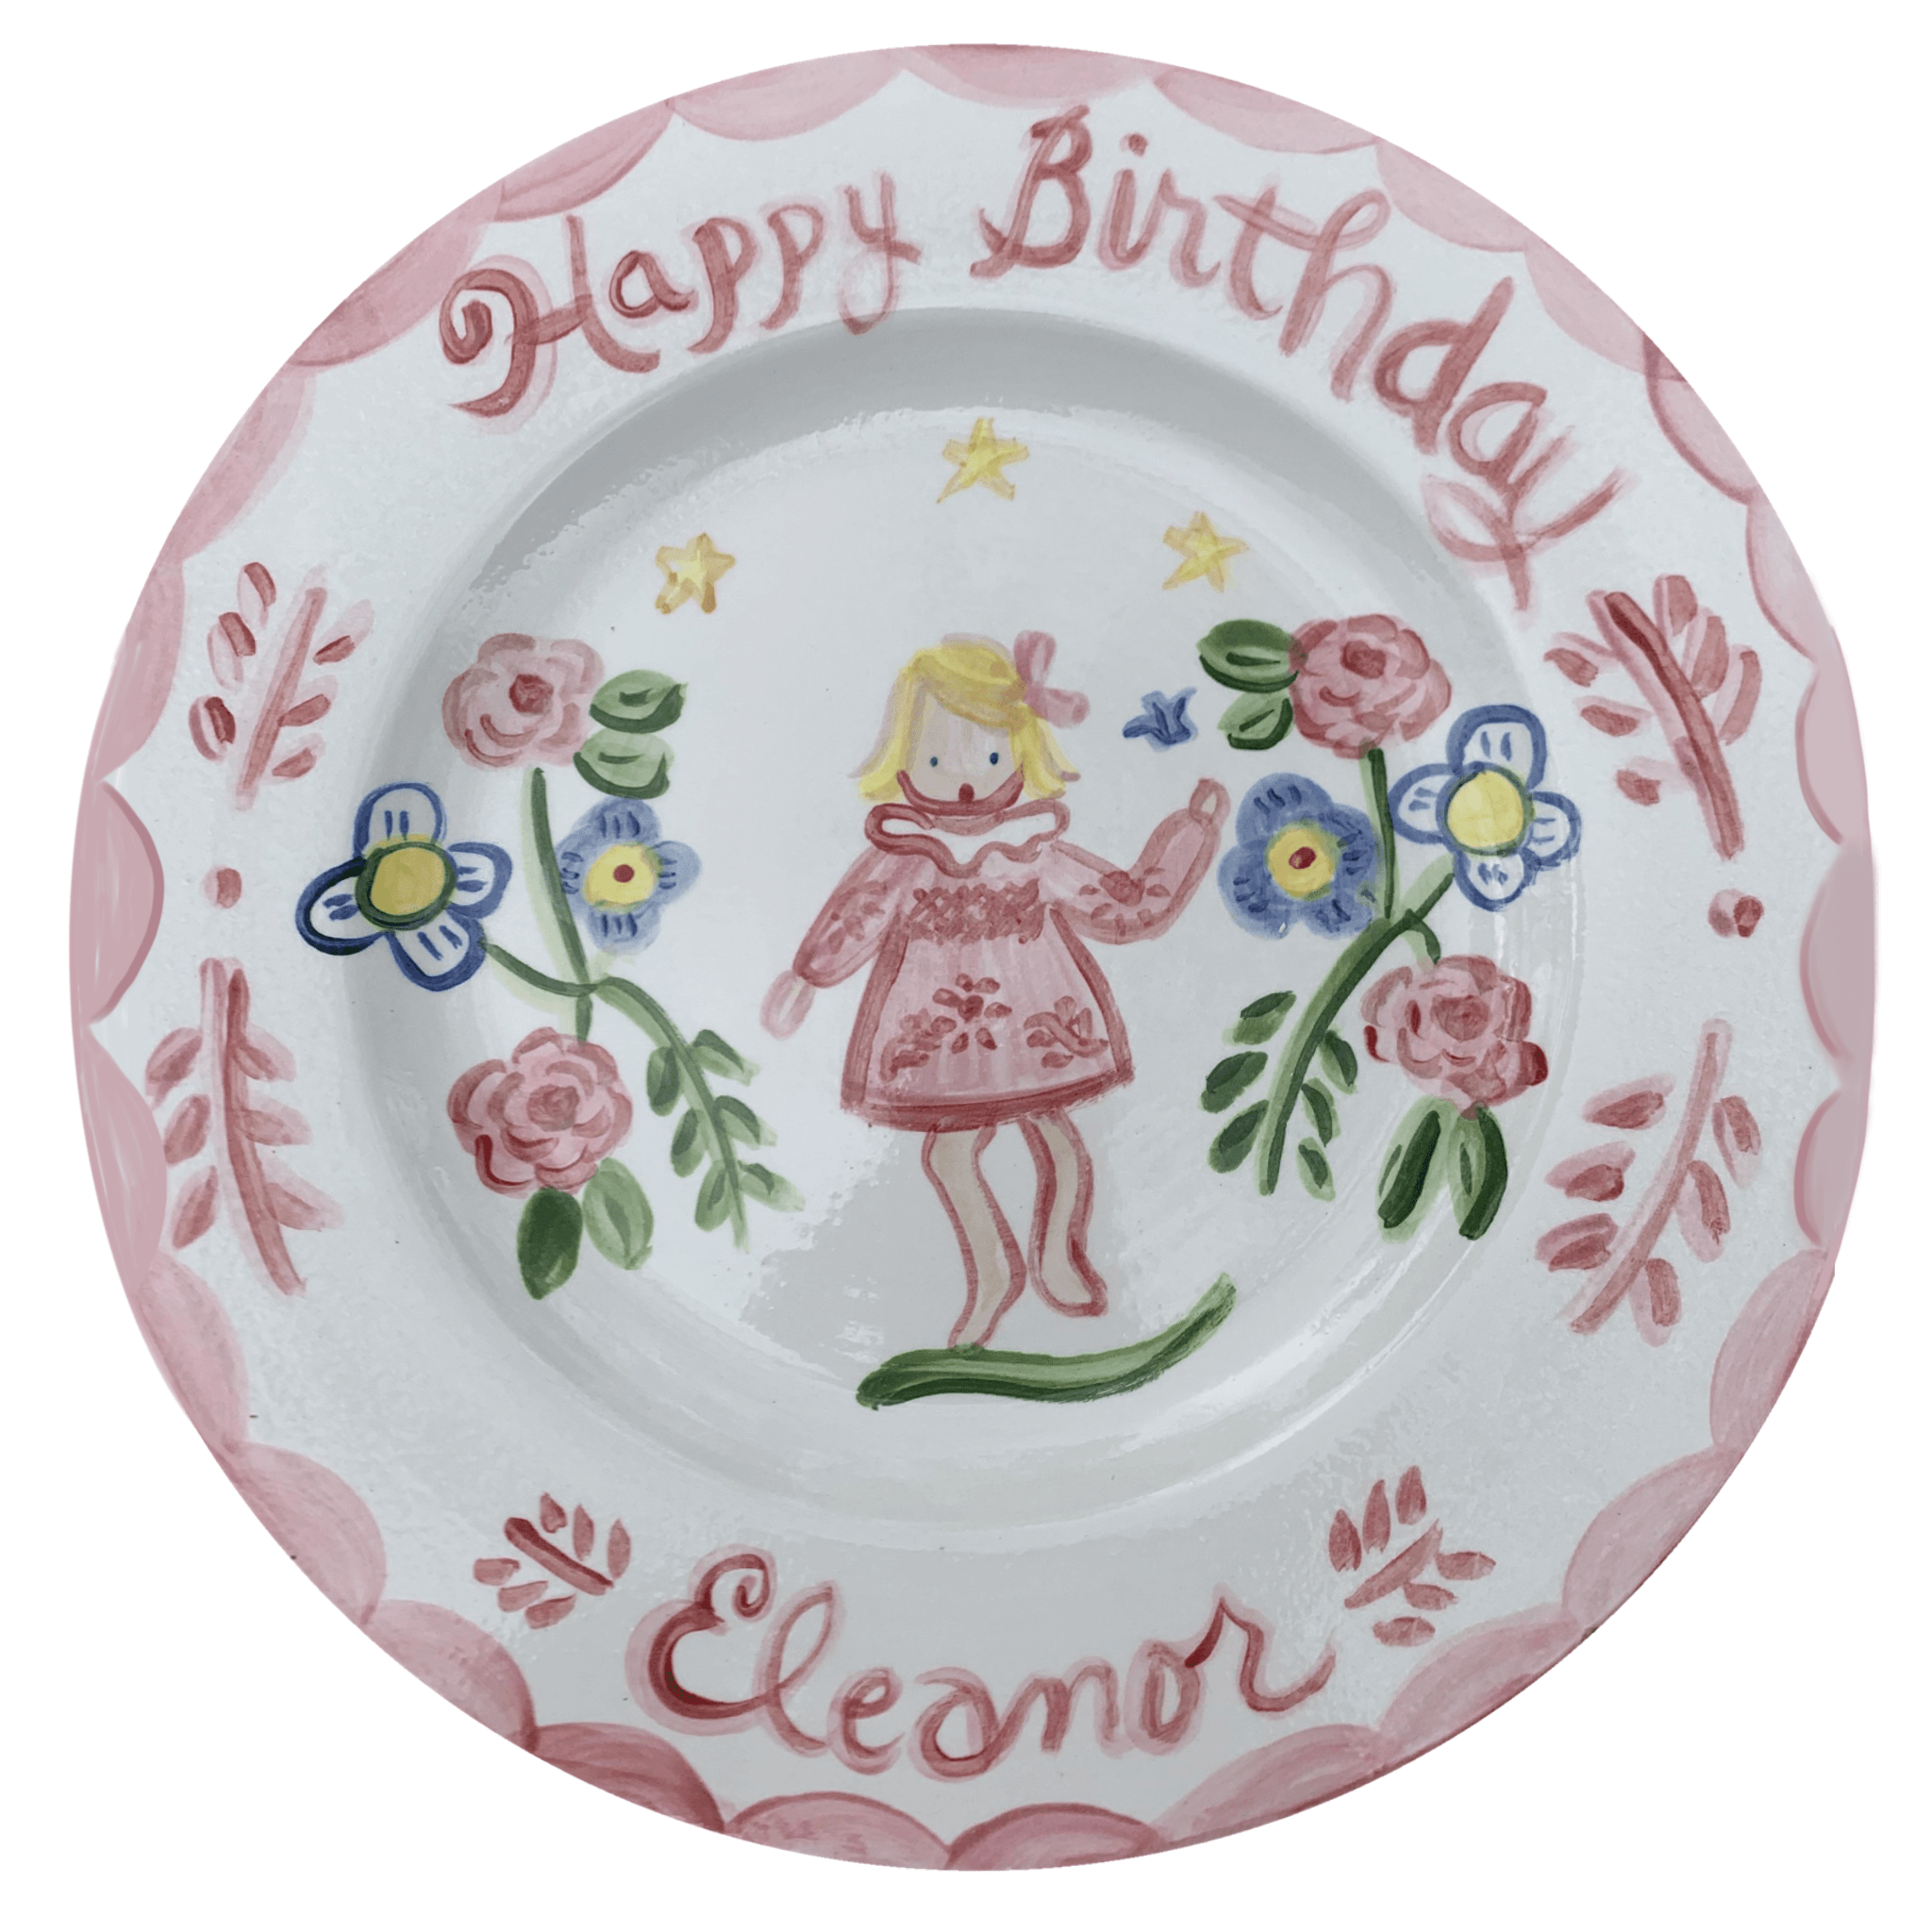 Birthday Plate - Girl with Tall Flowers - Tricia Lowenfield Design